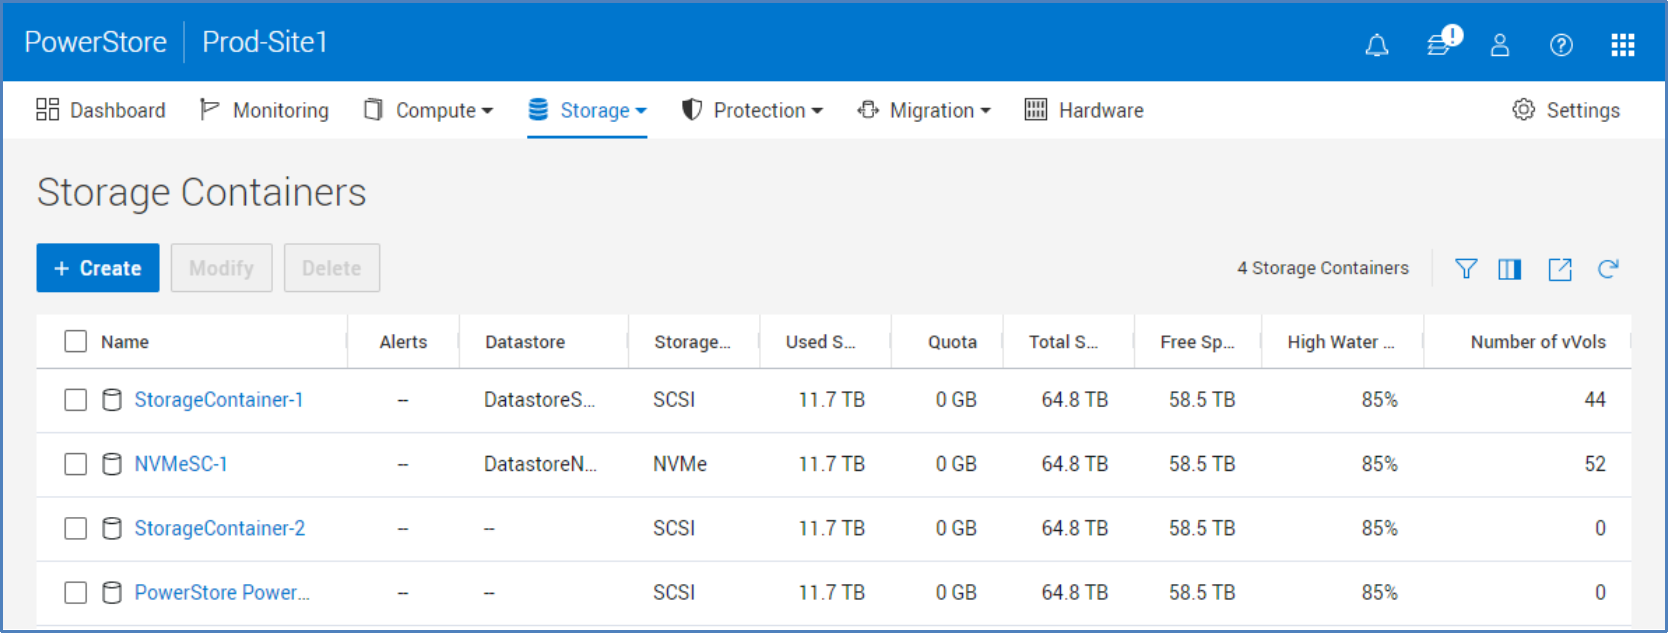 The Storage Containers page allows the creation of multiple containers across different storage protocols for virtual machine storage.